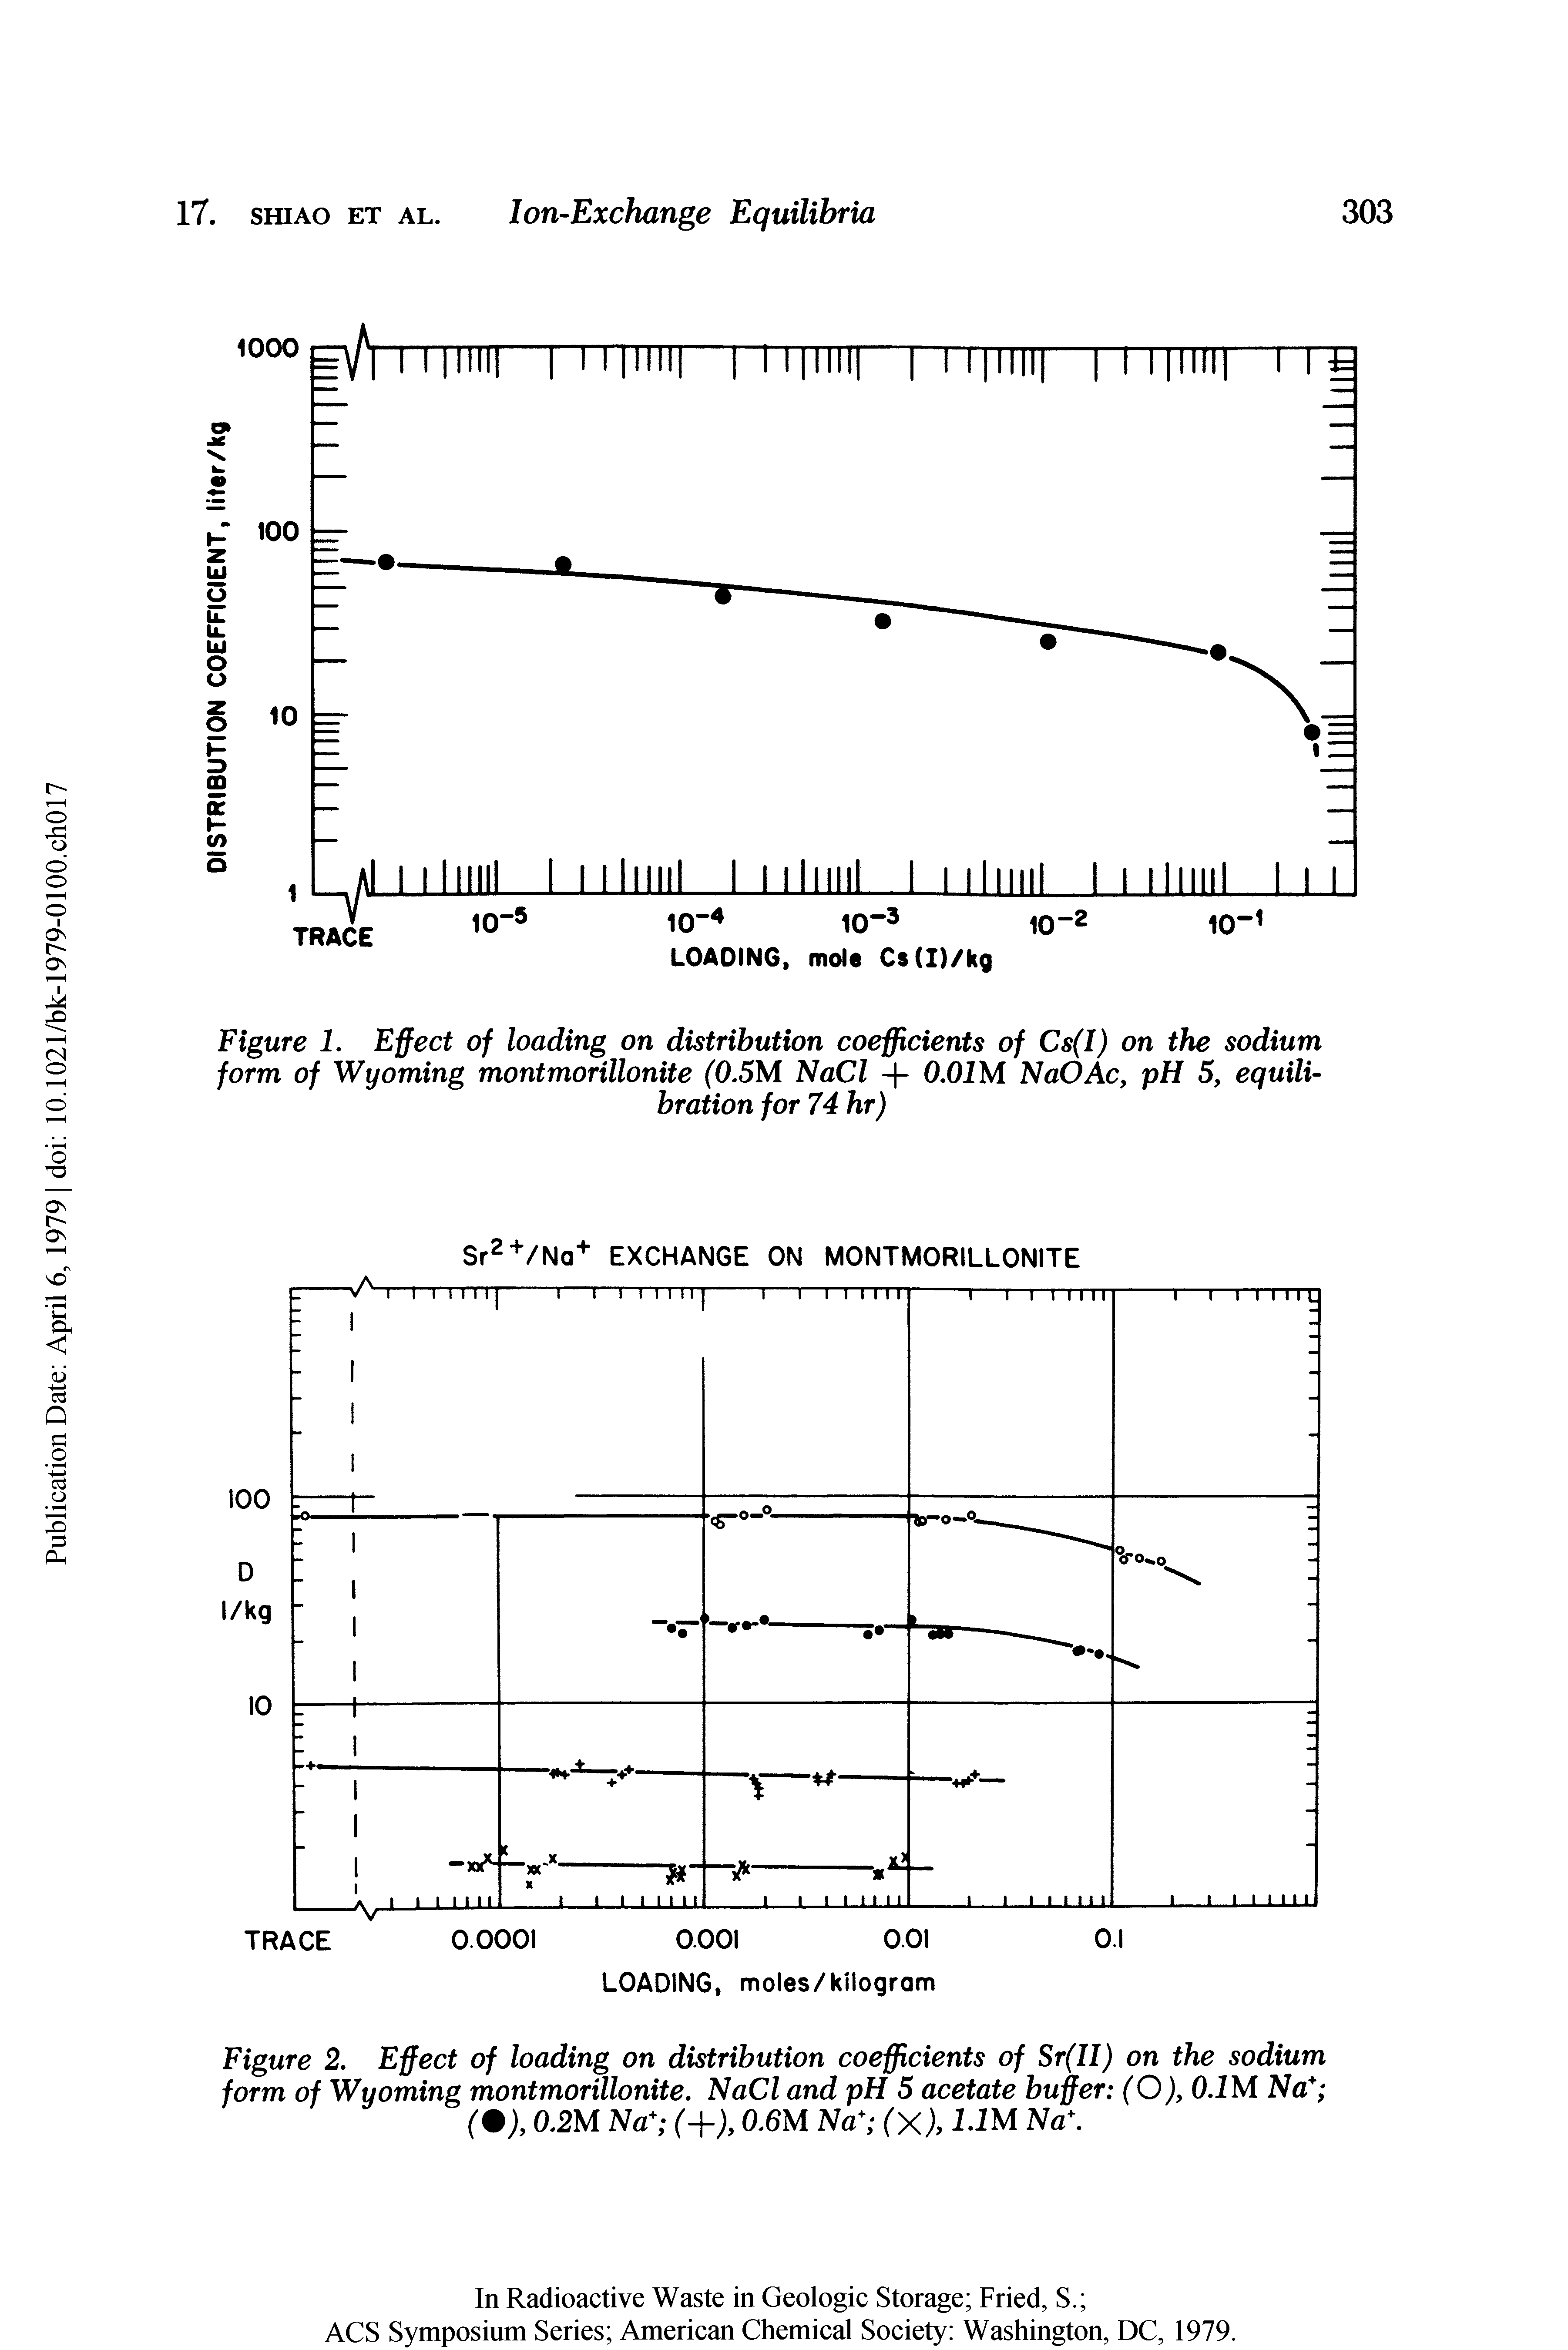 Figure 1. Effect of loading on distribution coefficients of Cs(I) on the sodium form of Wyoming montmorillonite (0.5M NaCl + 0.07 M NaOAc, pH 5, equilibration for 74 hr)...